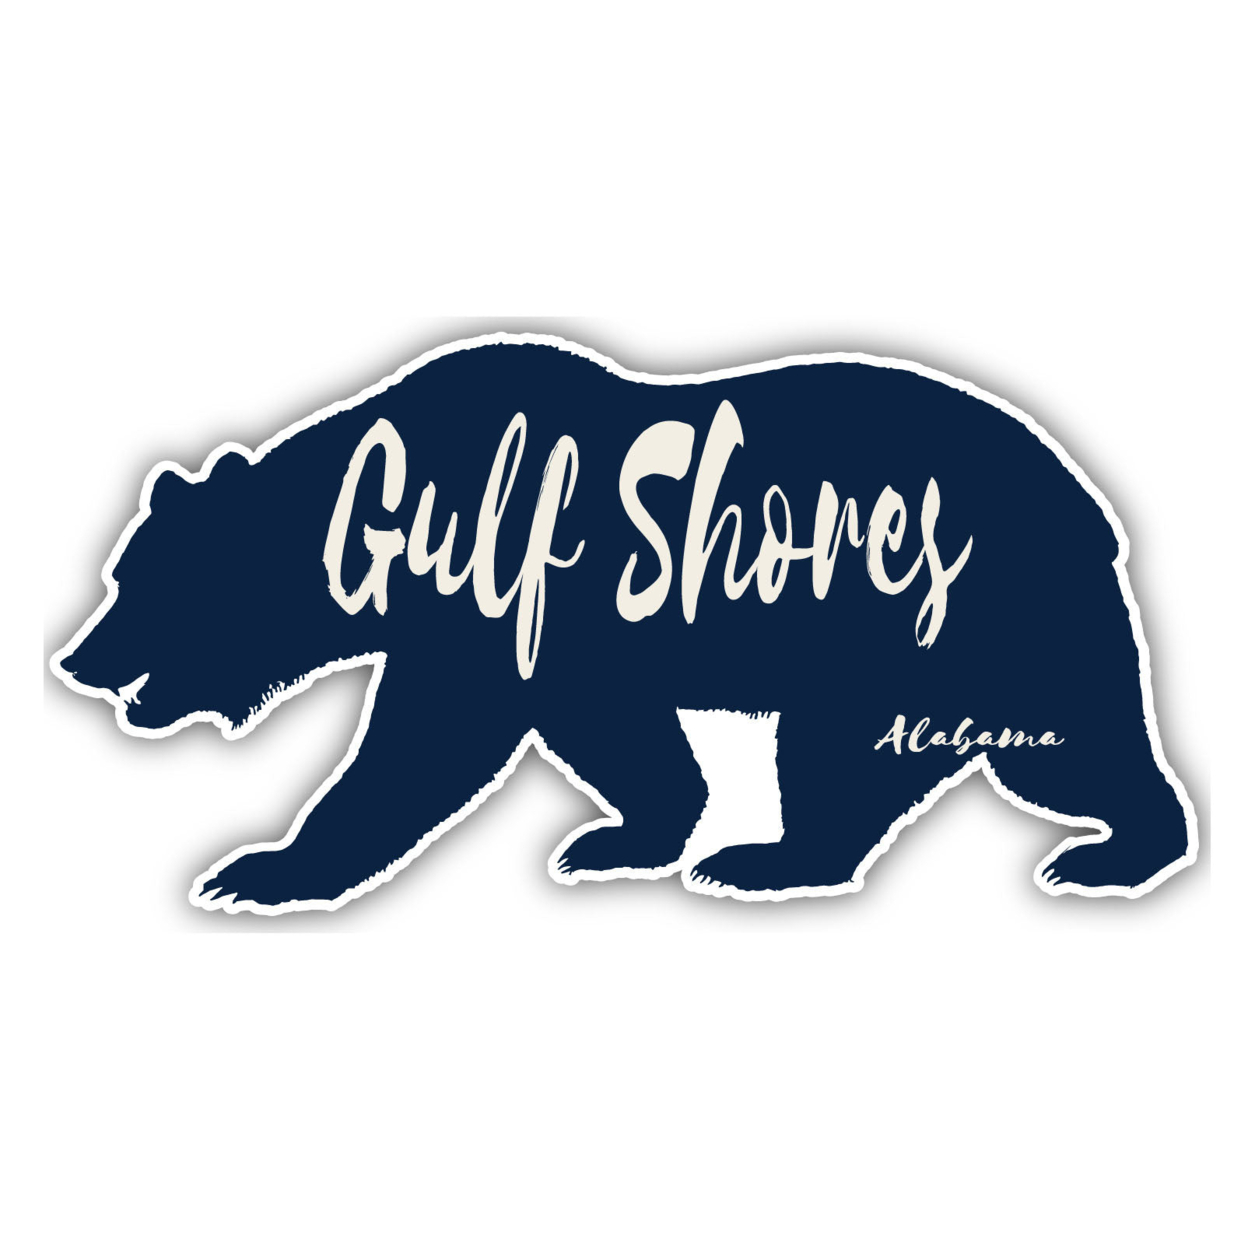 Gulf Shores Alabama Souvenir Decorative Stickers (Choose Theme And Size) - 4-Pack, 4-Inch, Tent